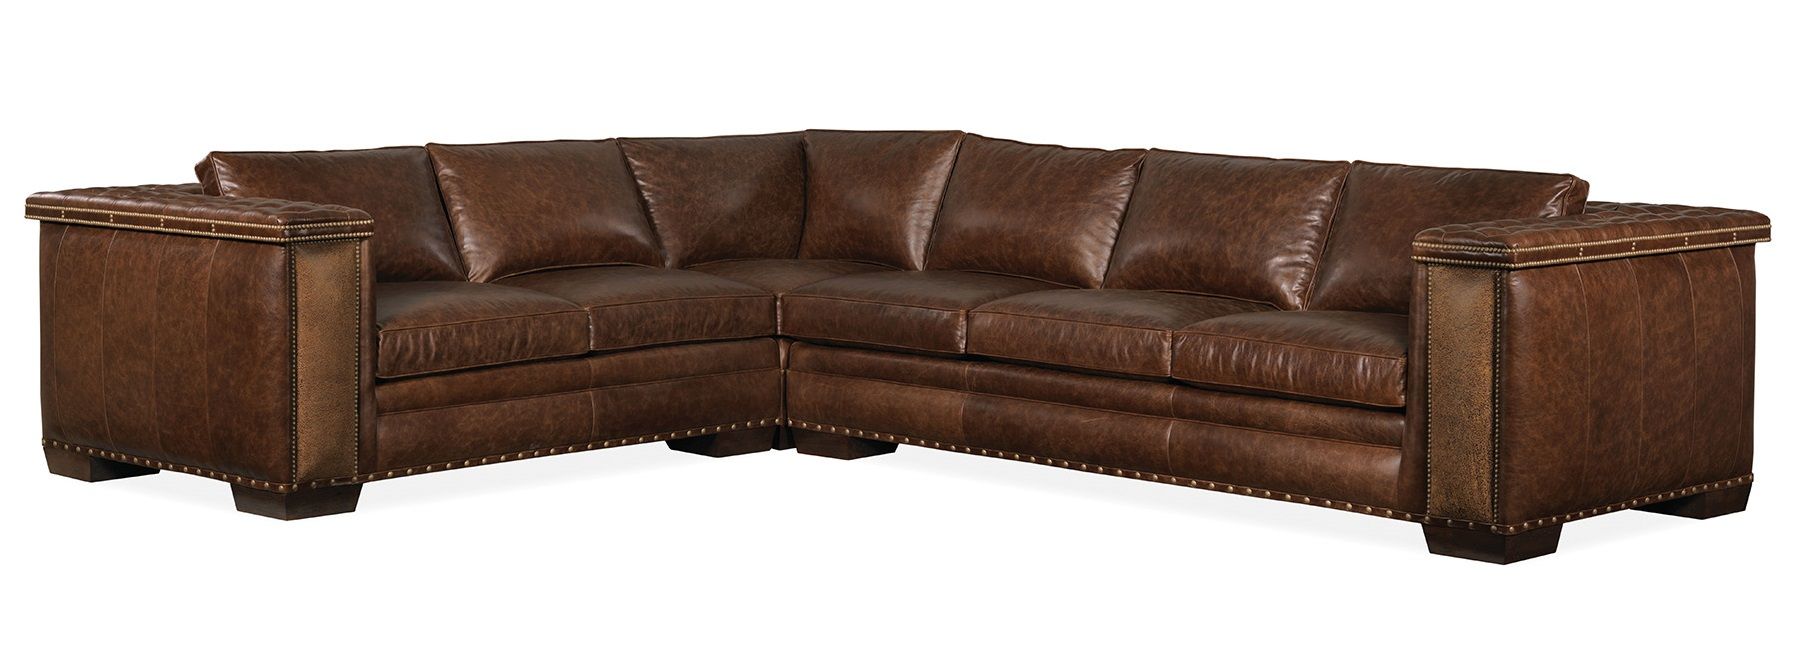 luxuriously cushioned and support-filled Macgregor Raf Sofa, perfect for relaxation